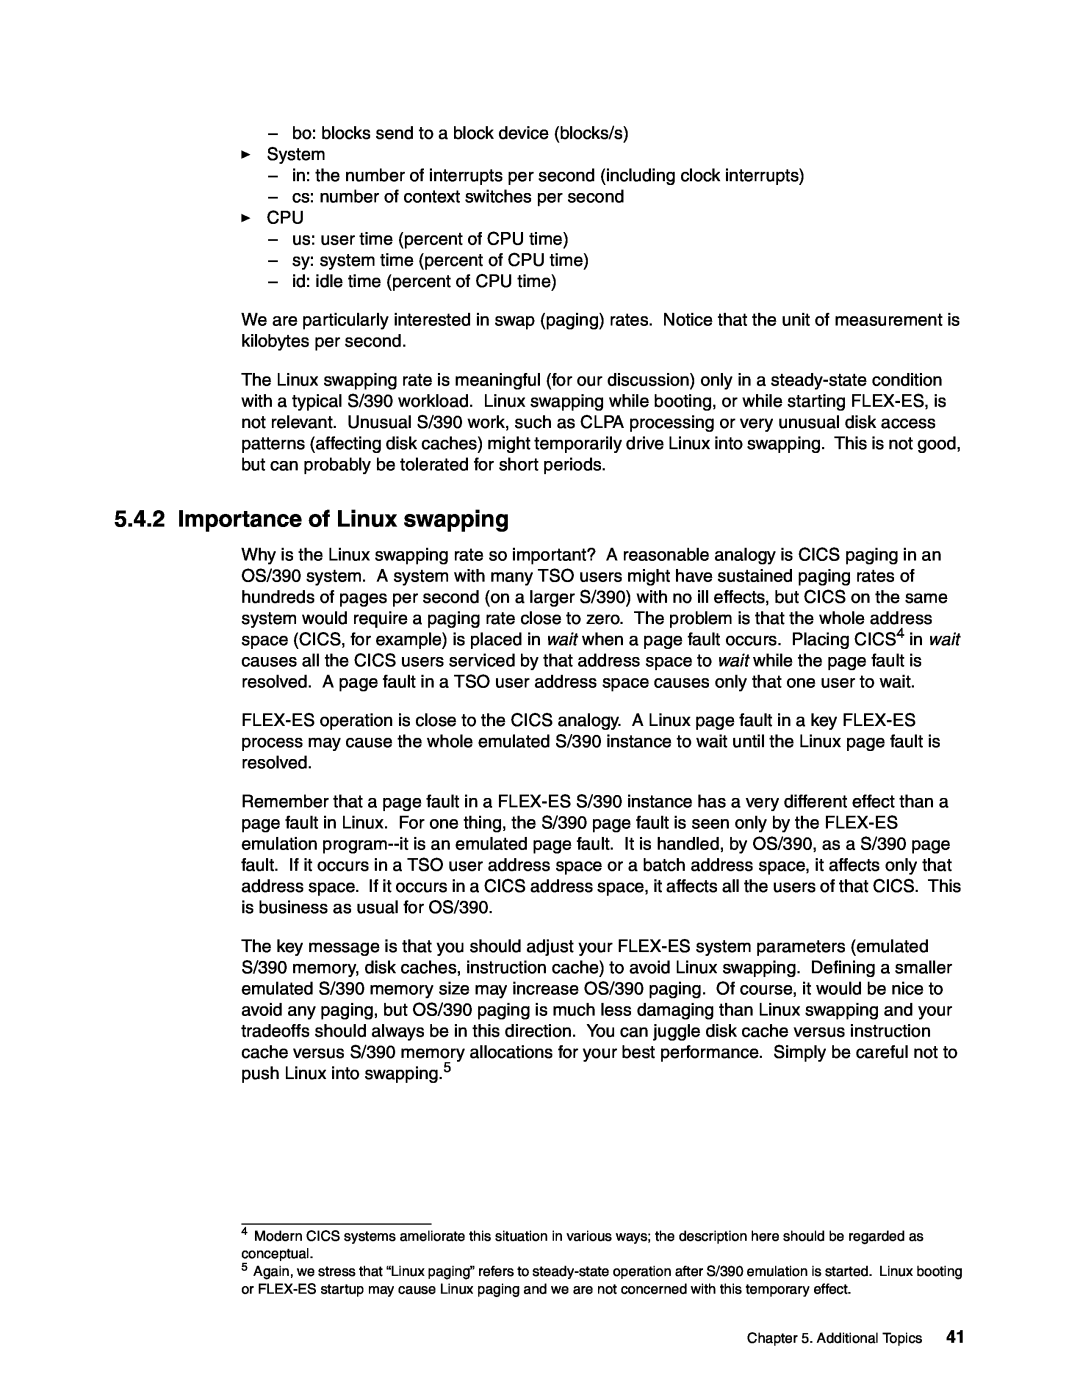 IBM s/390 manual Importance of Linux swapping 